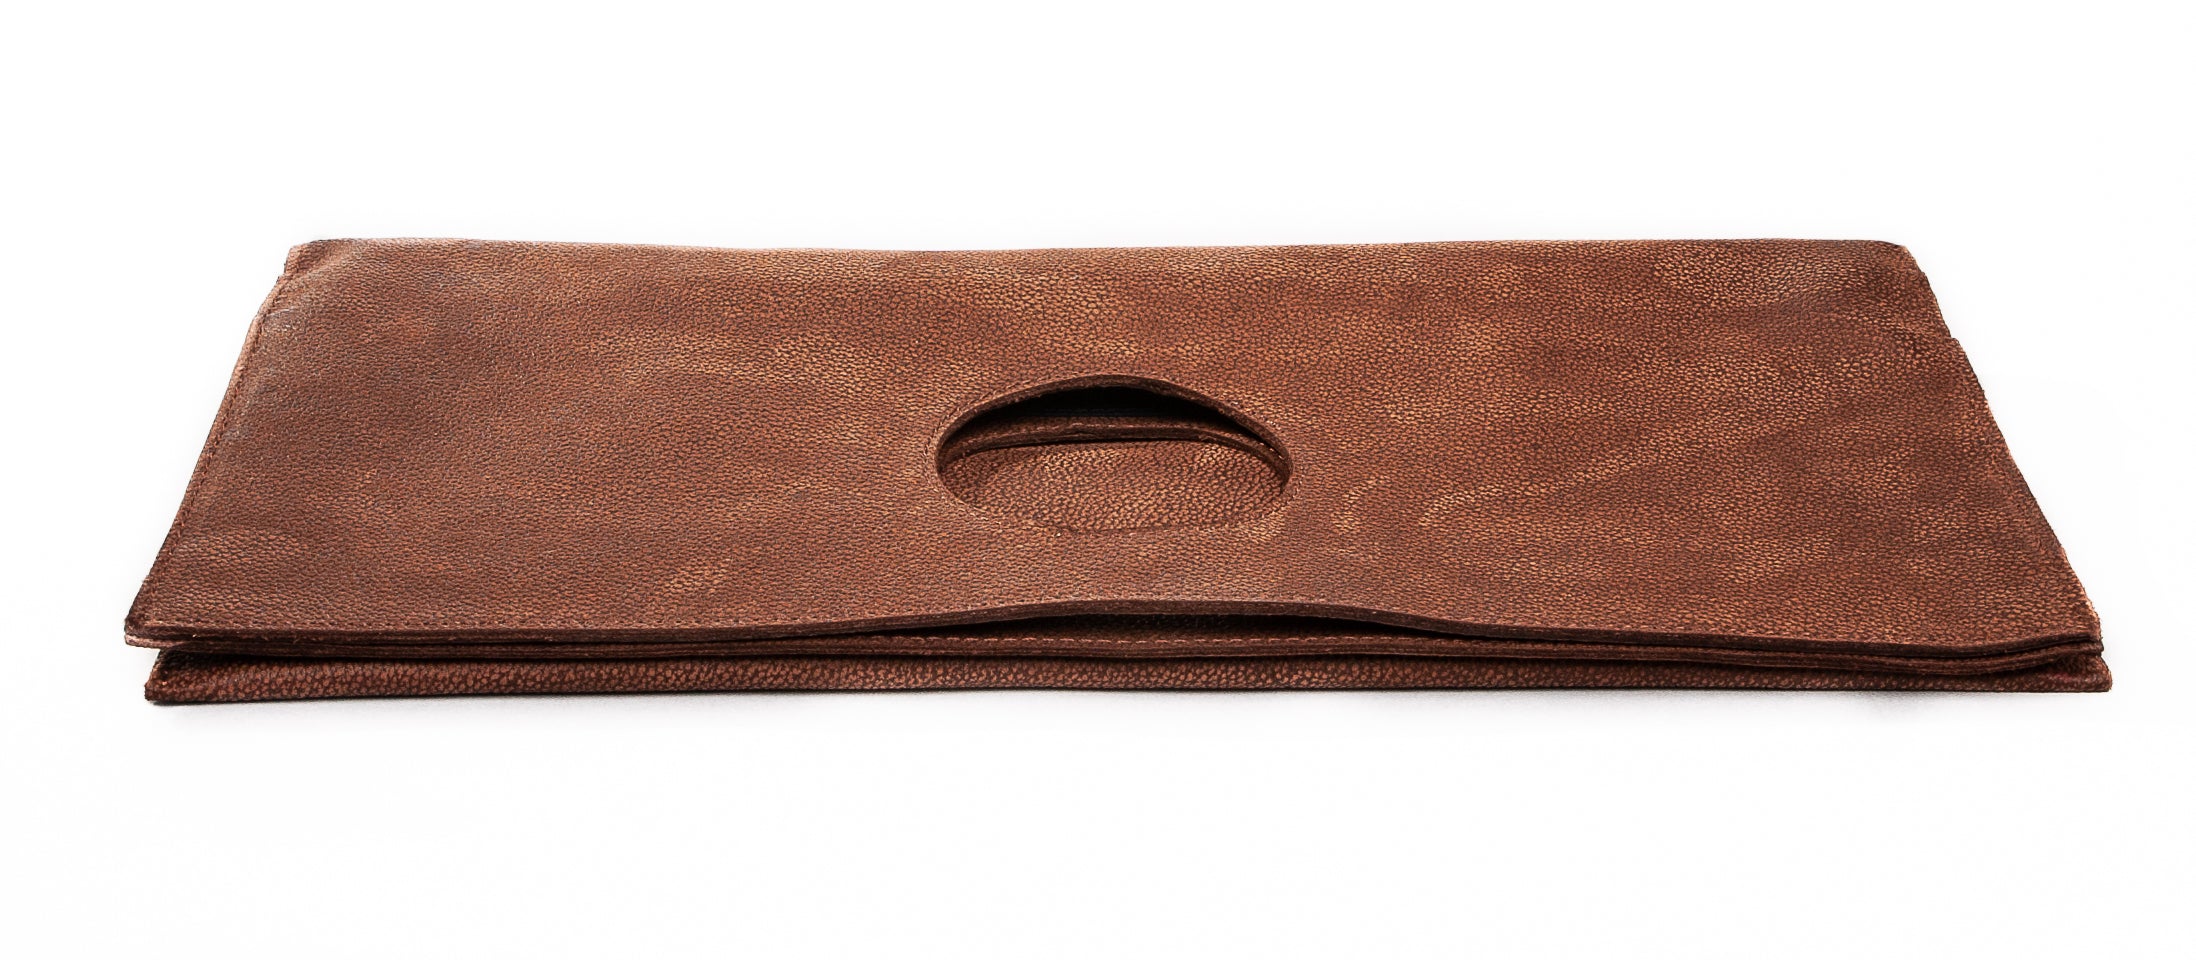 Gifti Fold Over Leather Clutch/Handbag with Top Handle (Espresso)